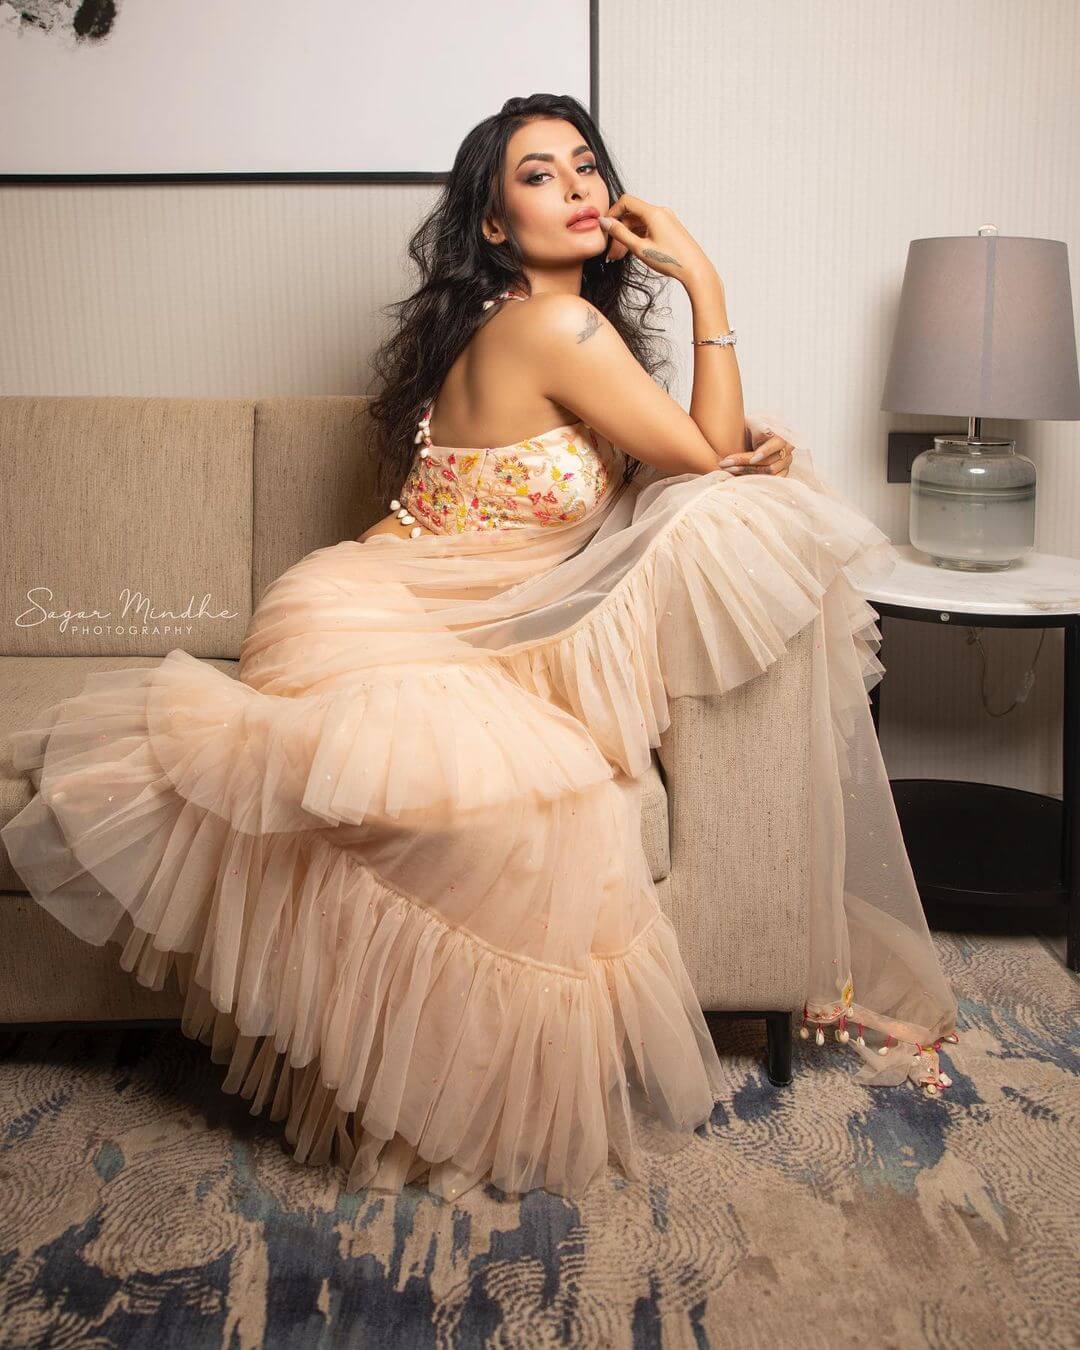 Pavitra Punia Sexy & Chic Look In Beige Ruffled Net Saree With Embroidered Blouse